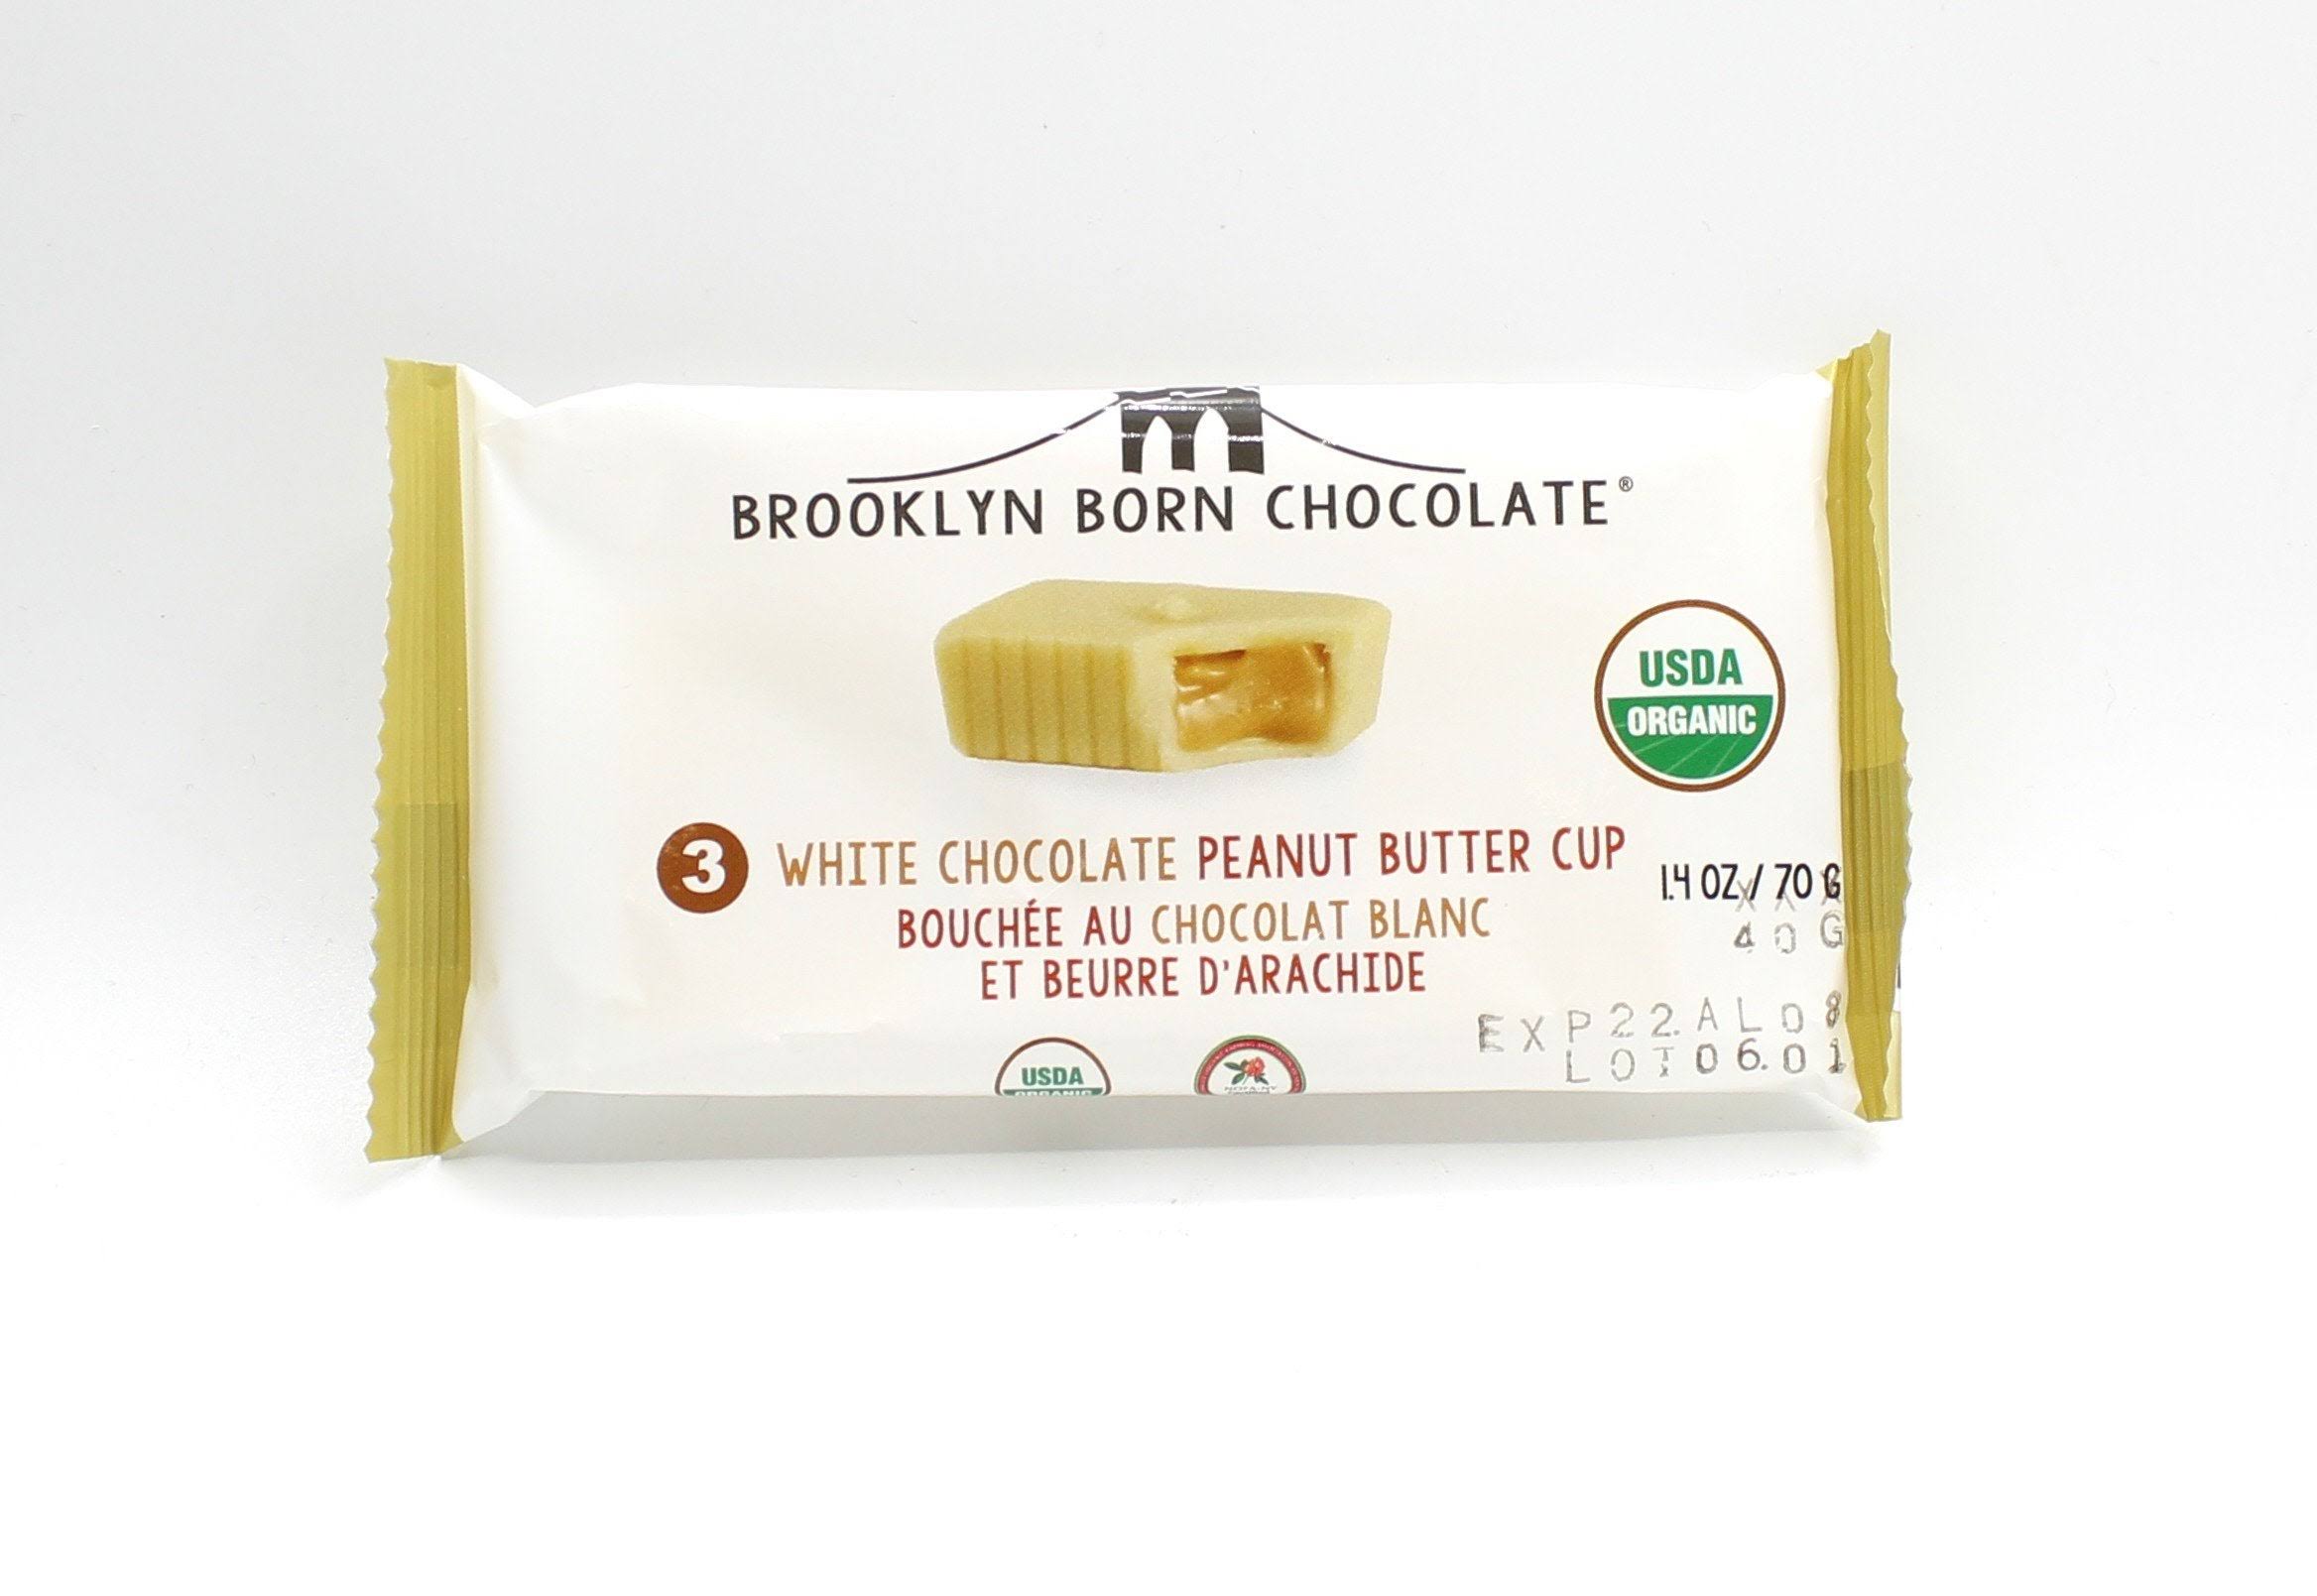 Brooklyn Born Chocolate Peanut Butter Cup, White Chocolate - 3 cups [1.4 oz/40 g]